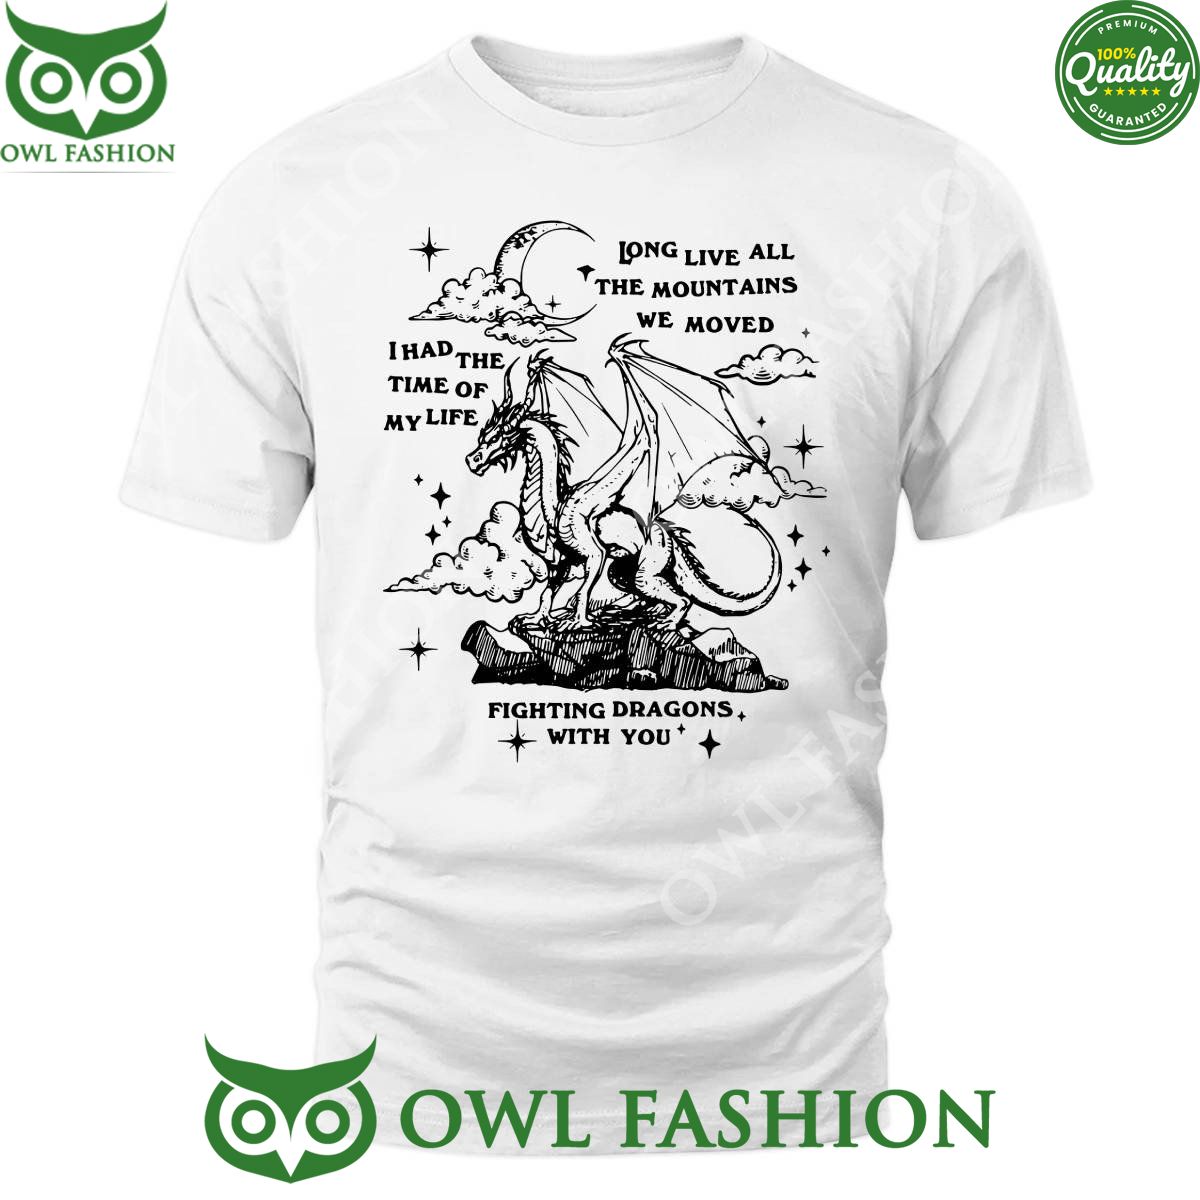 Taylor Swift Fighting Dragons with you I Had The Time Long live all the mountains we moved t shirt